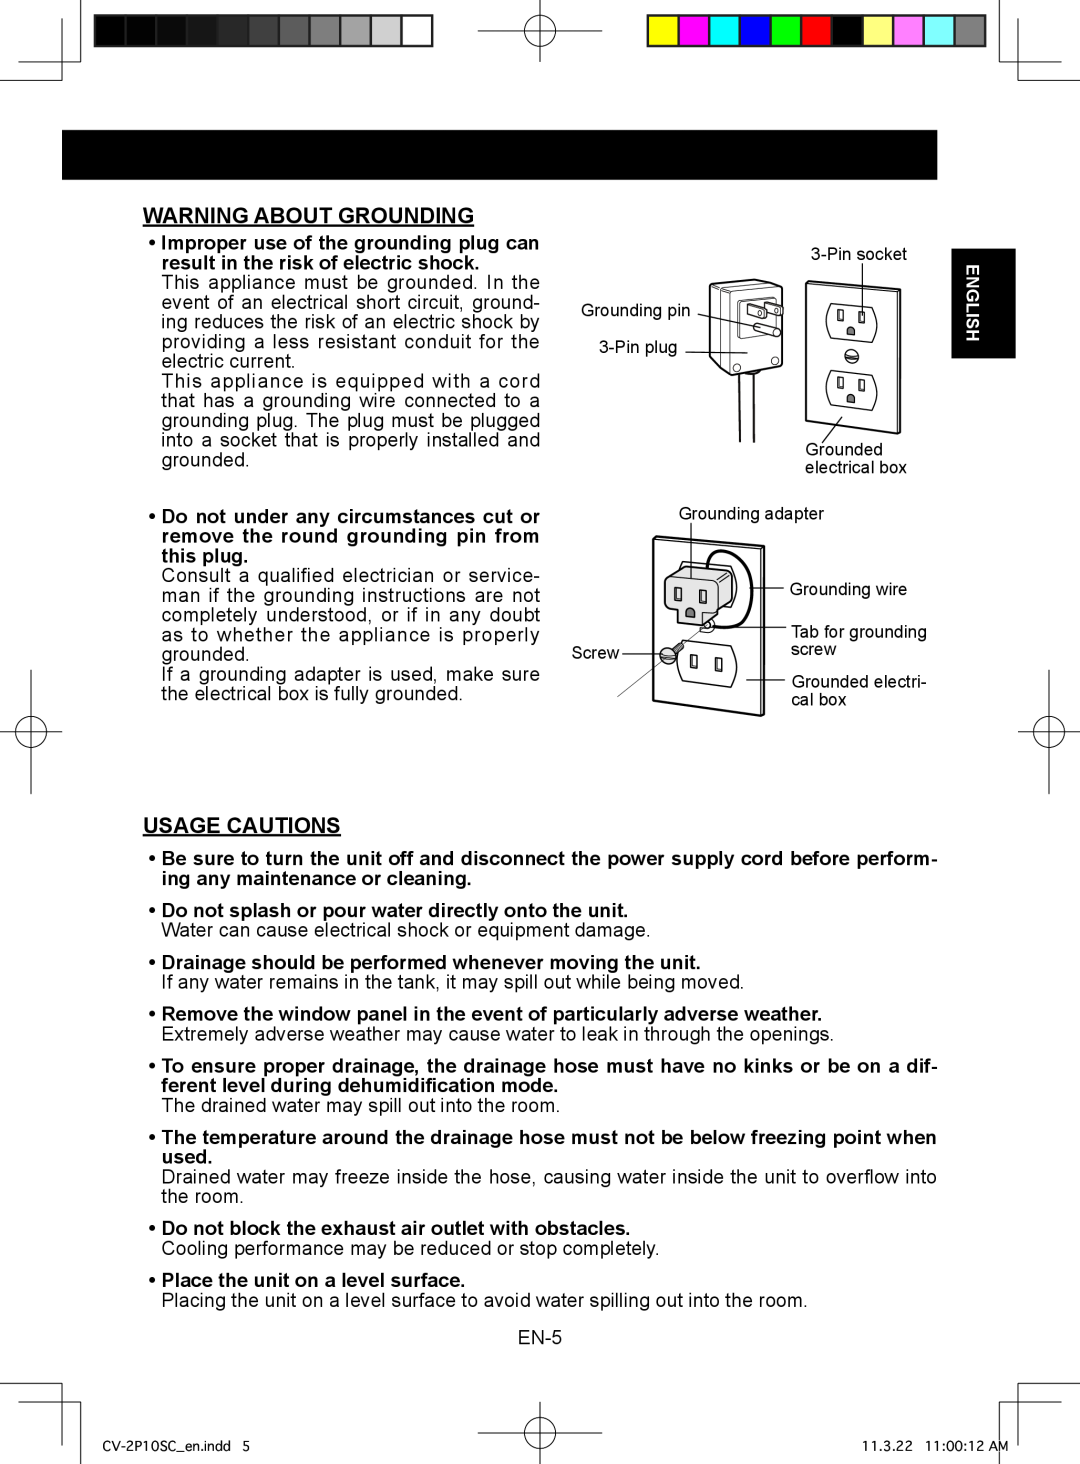 Sharp CV-2P10SC operation manual Warning About Grounding, Usage Cautions 